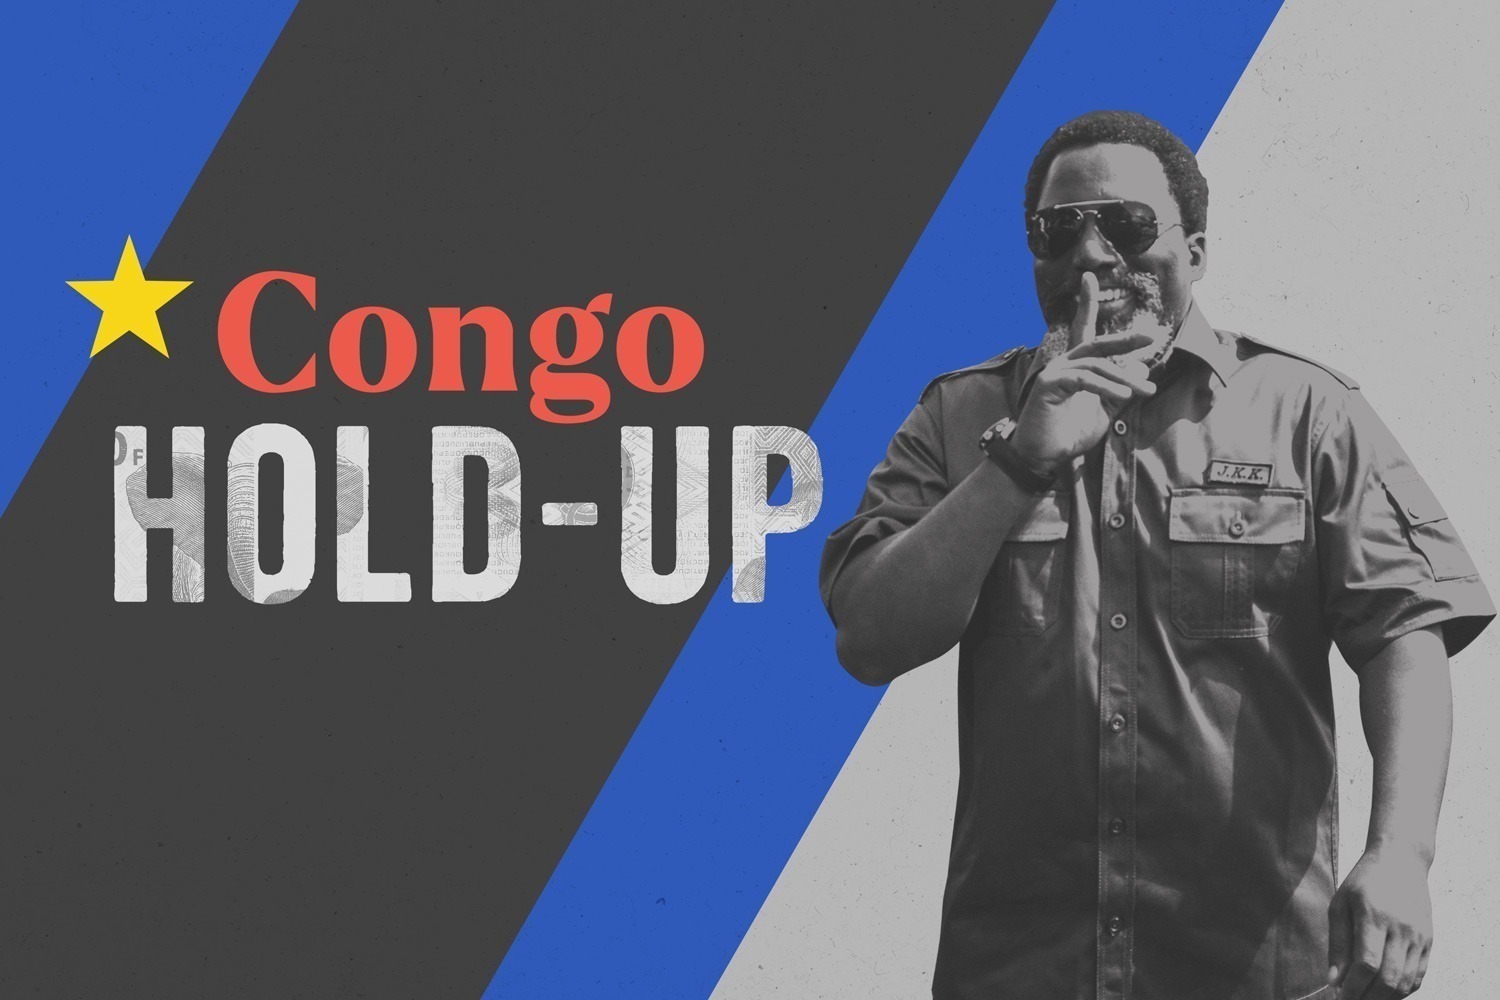 Congo Hold-up: Africa’s biggest leak reveals massive corruption in DRC and beyond